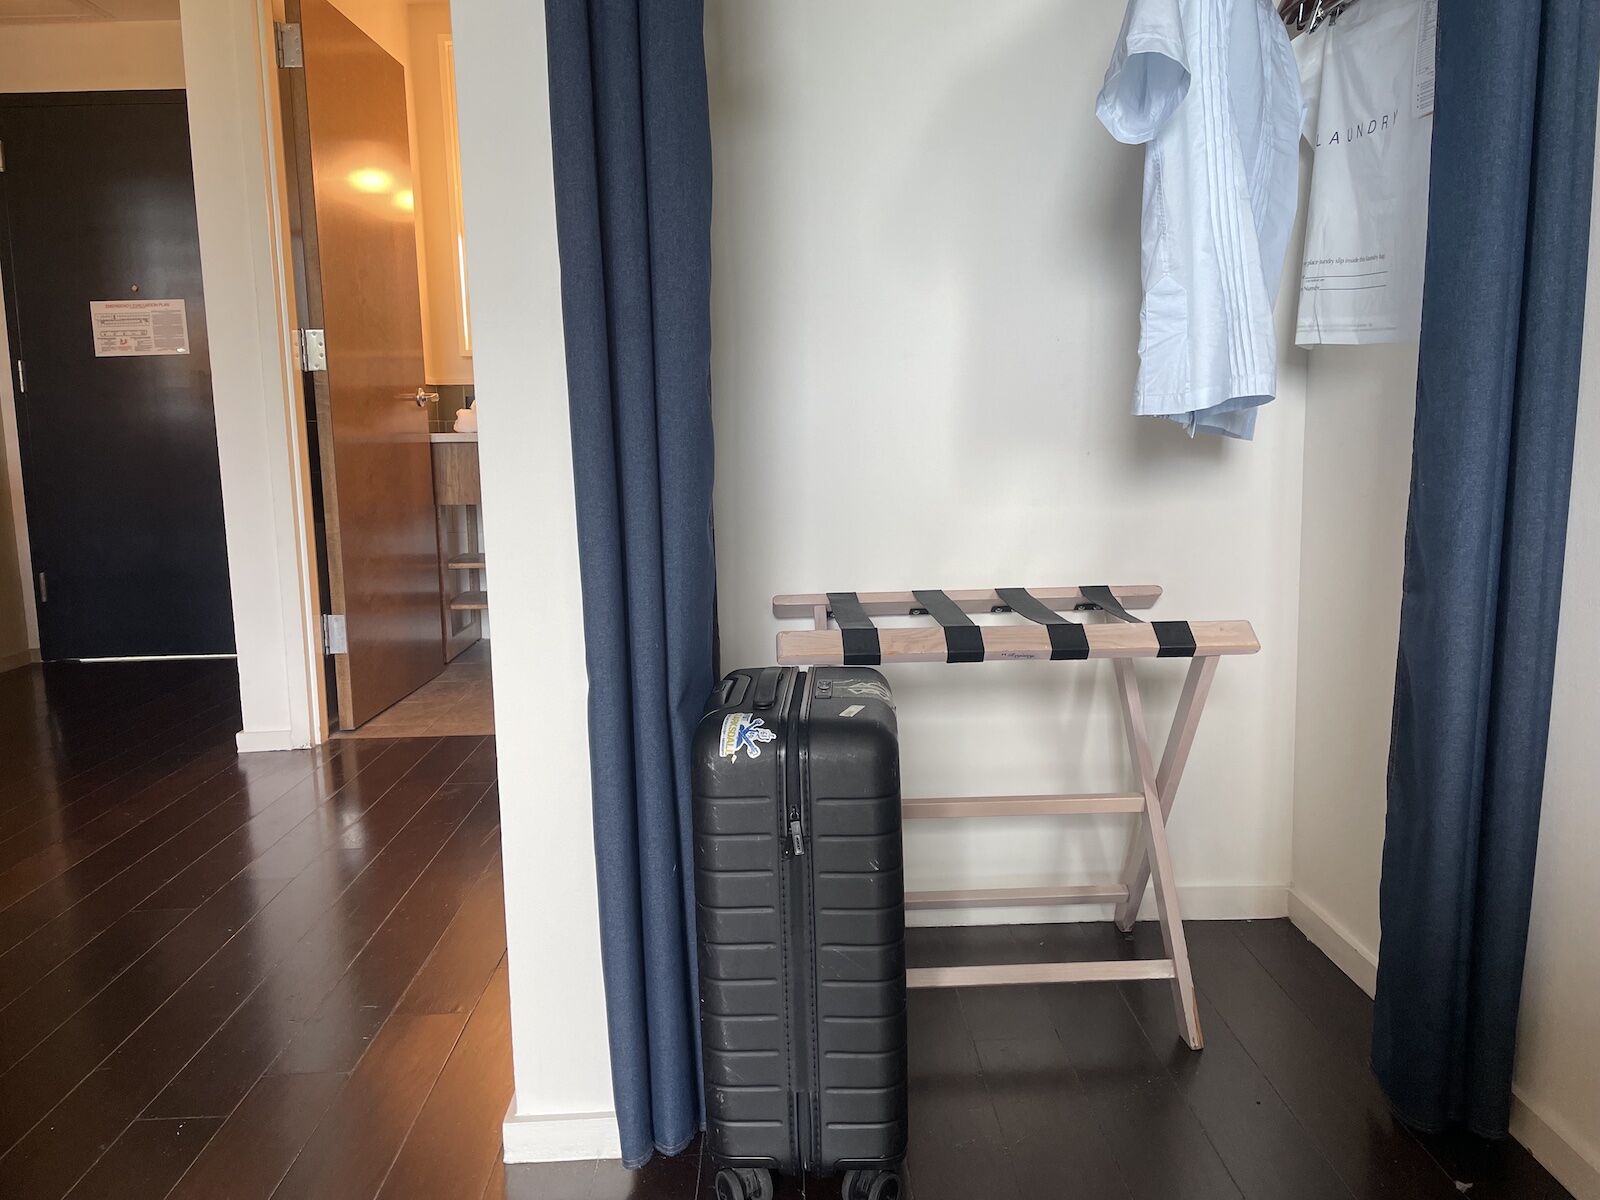 away carry-on in hotel room